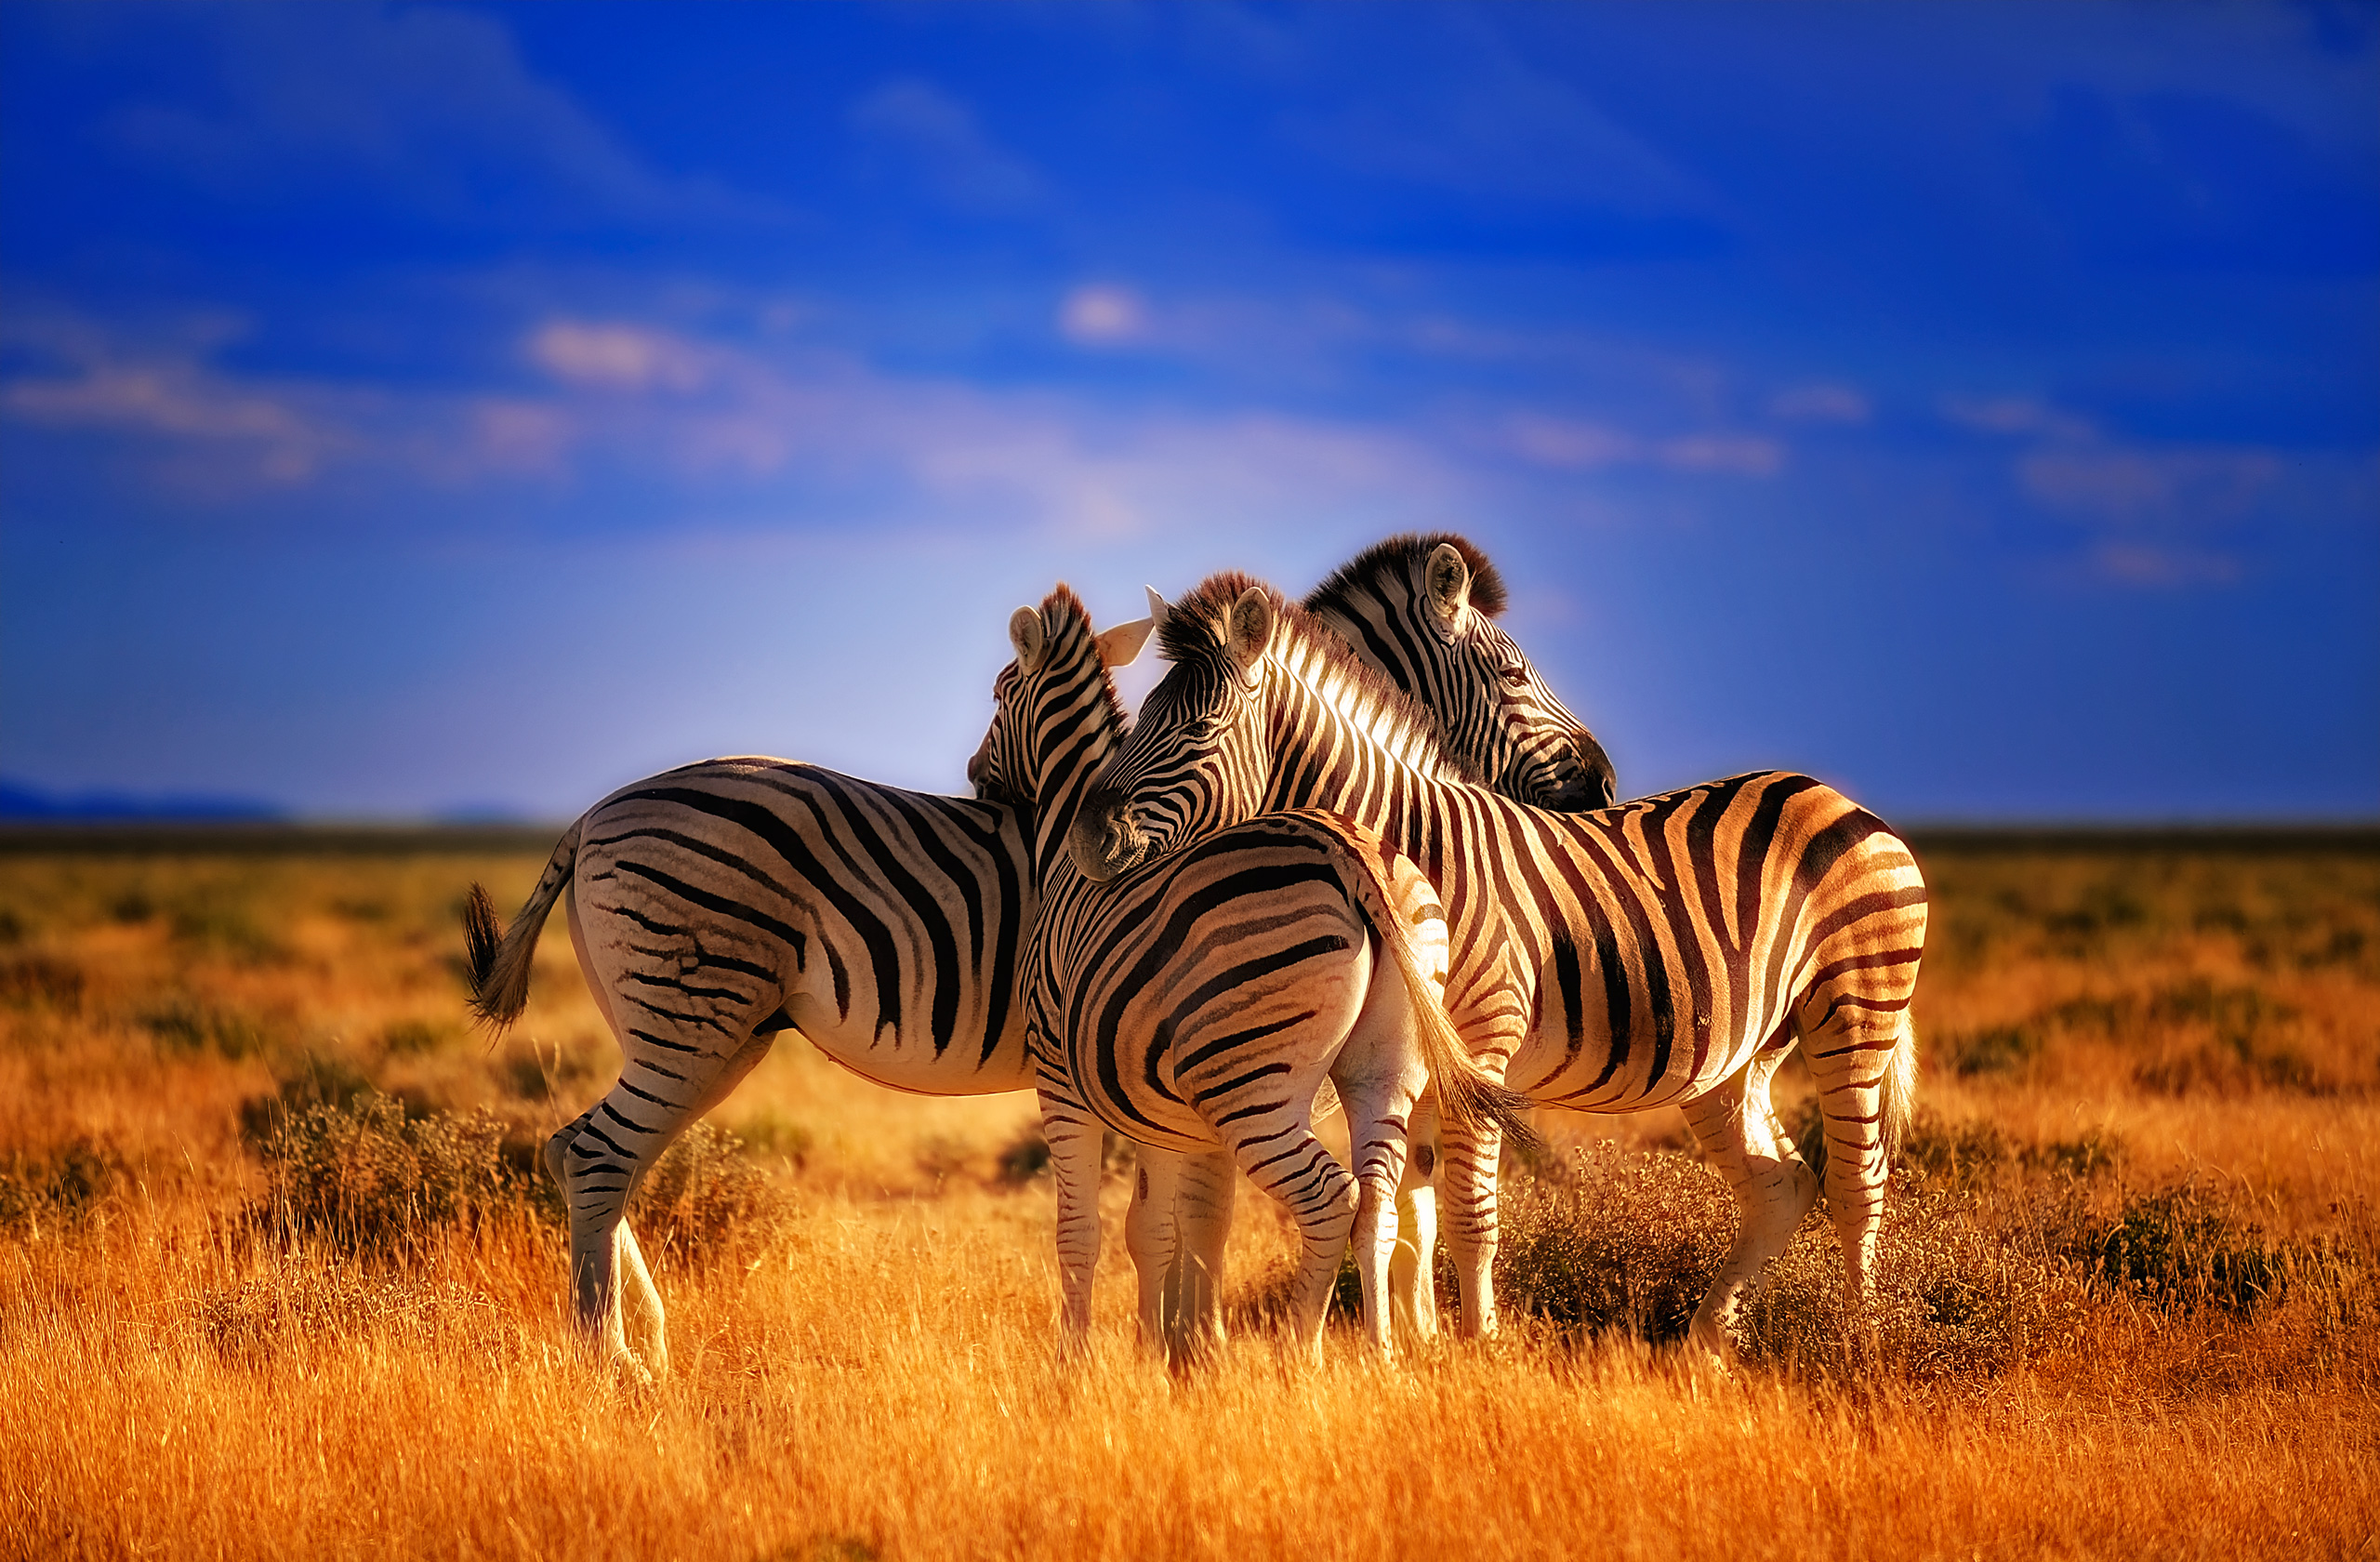 122 Zebra HD Wallpapers | Backgrounds - Wallpaper Abyss - Page 3